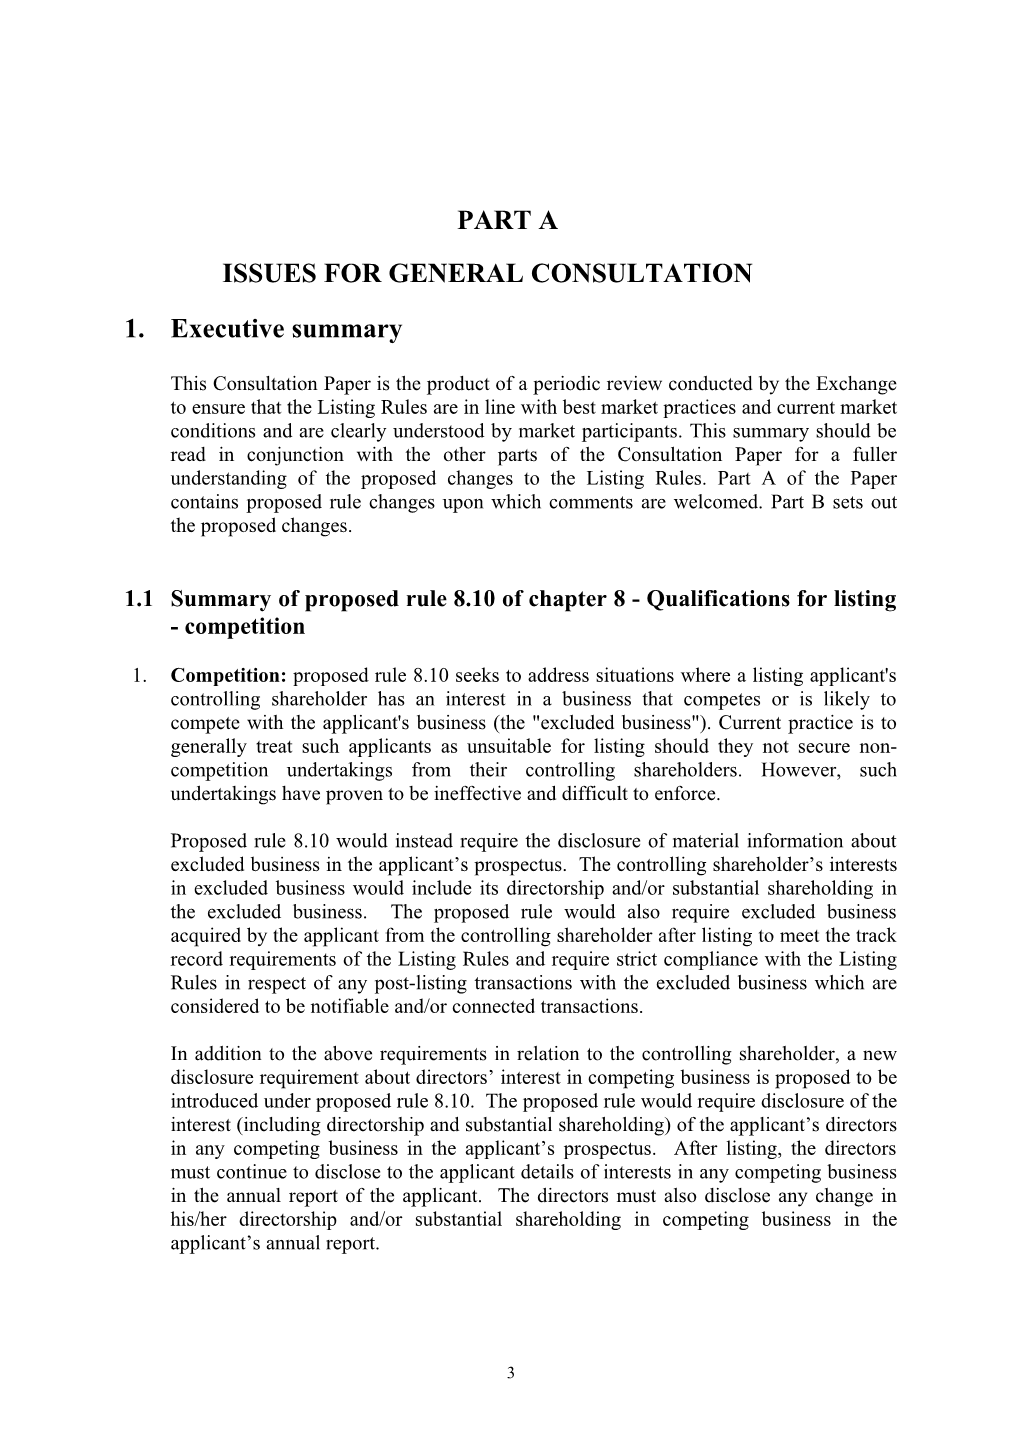 Consultation Paper - 1998 Review of Listing Rules